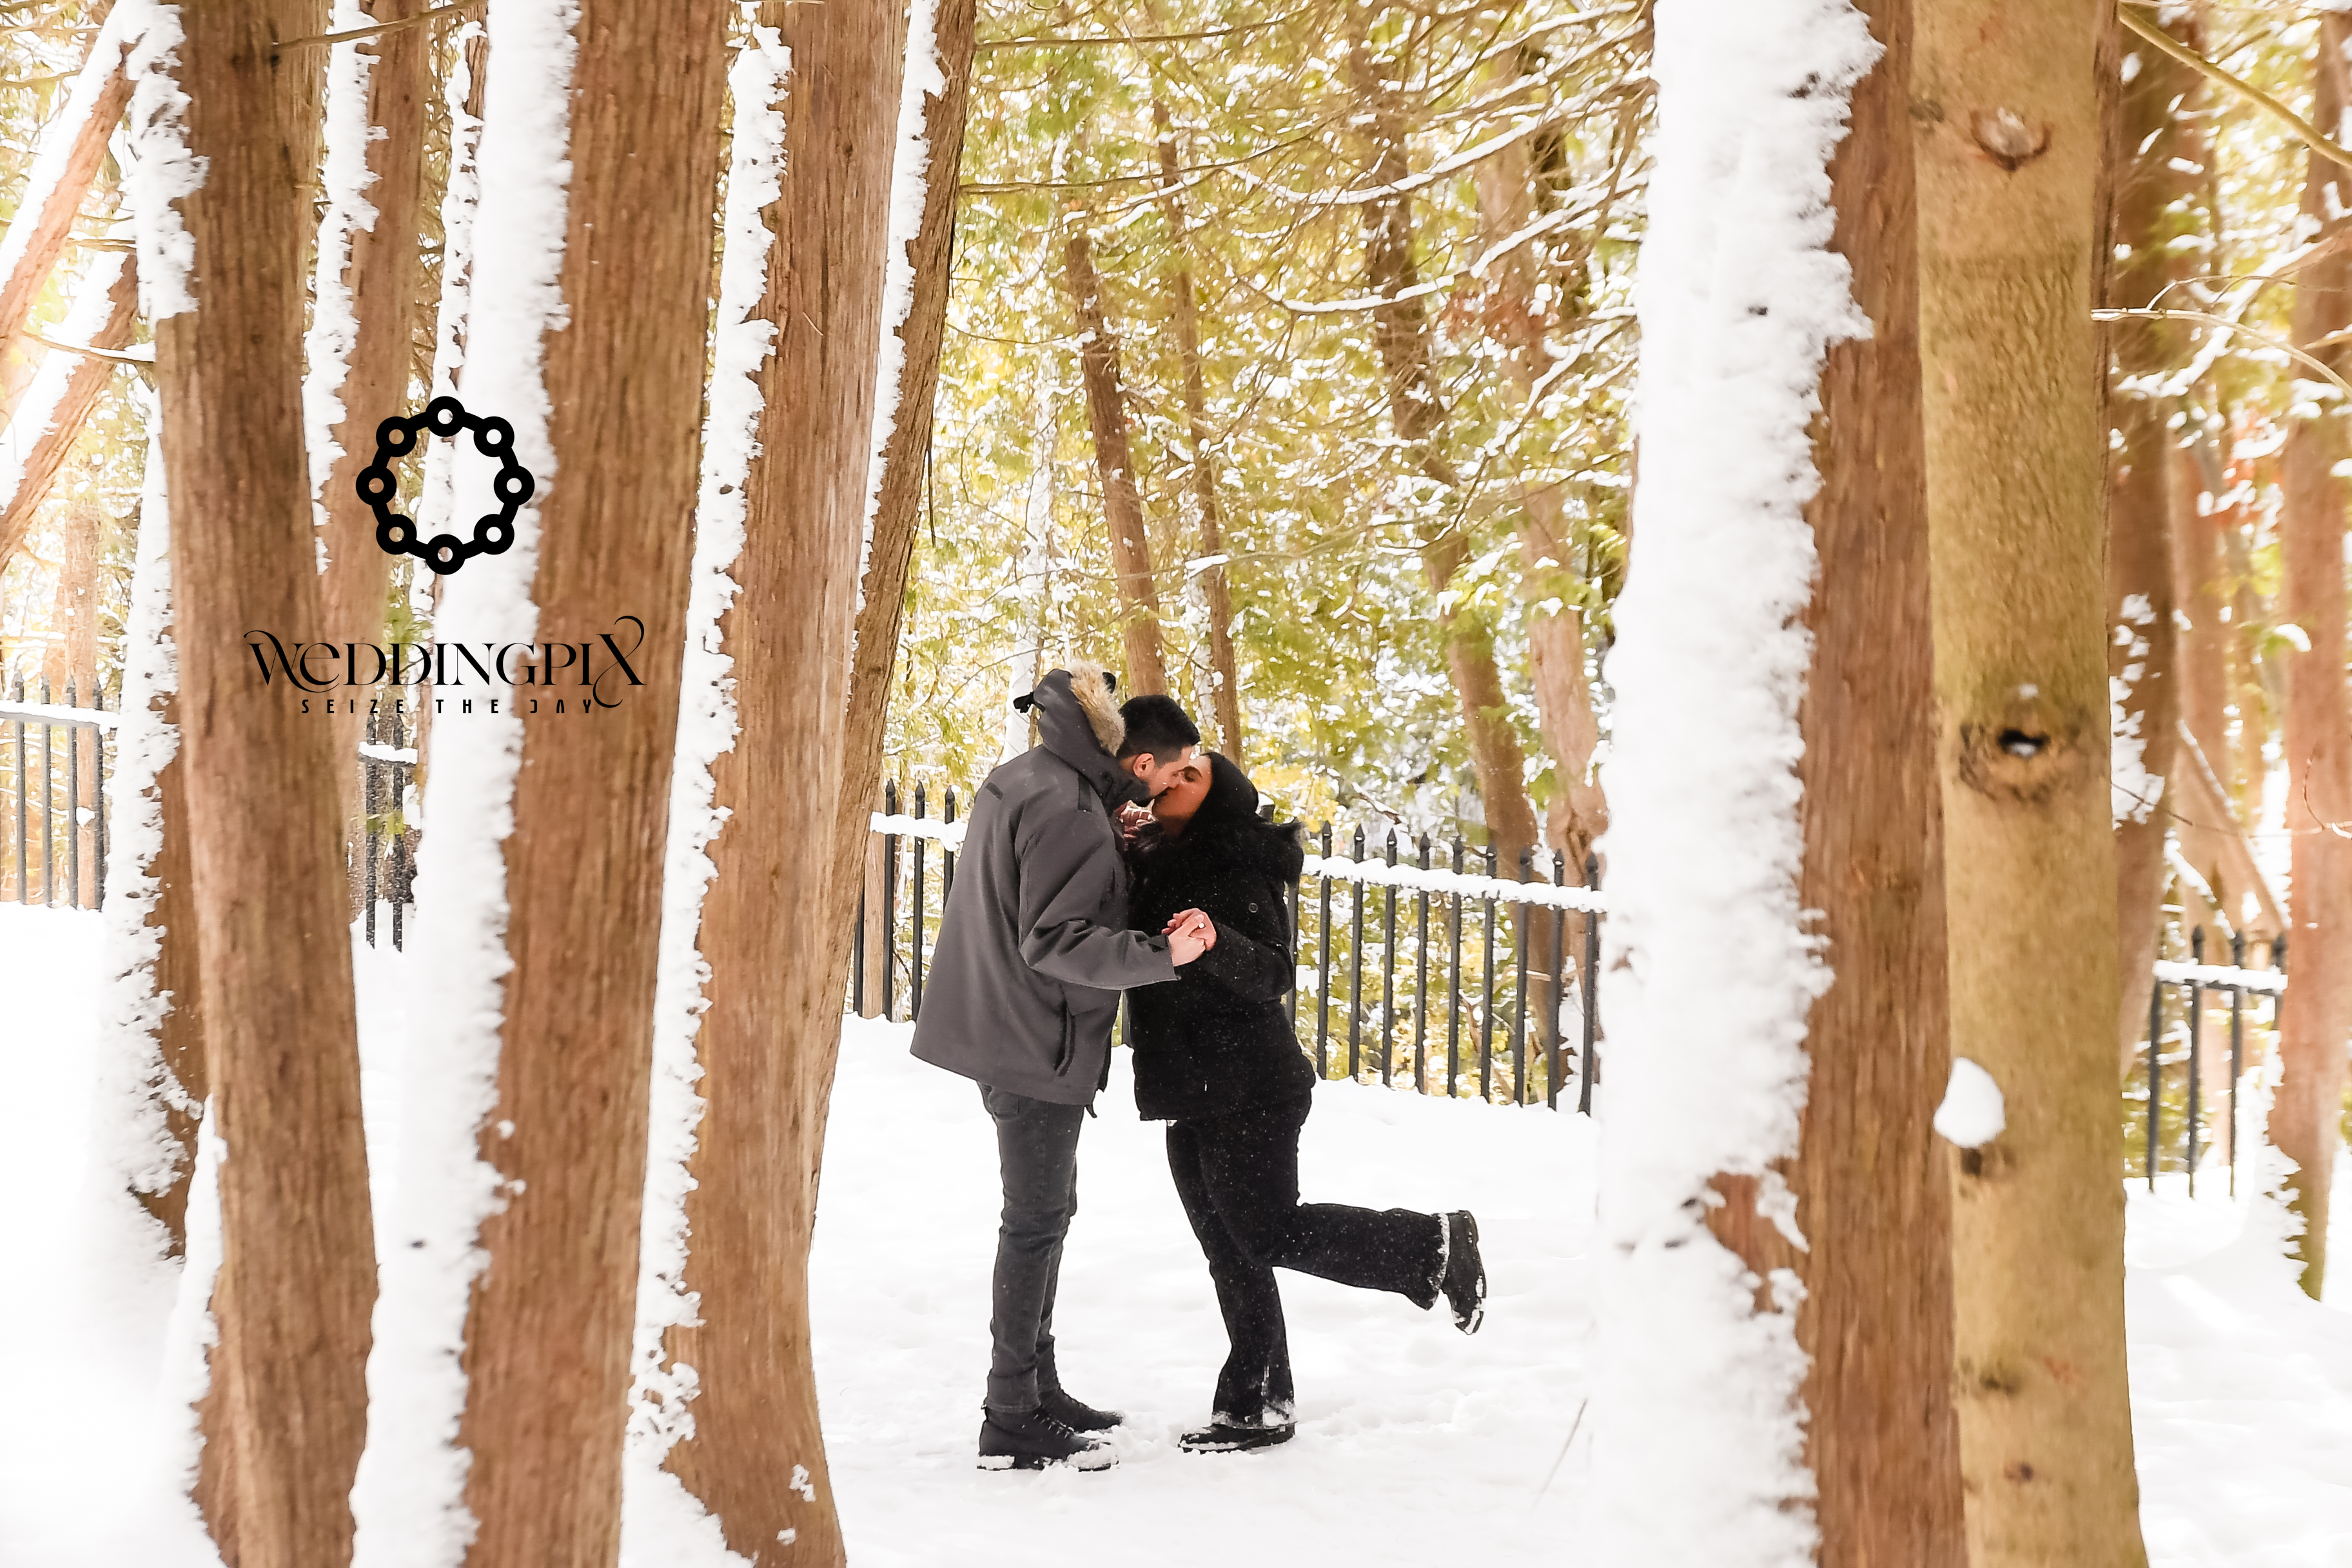 Winter engagement photo shoot amongst snow-covered trees.